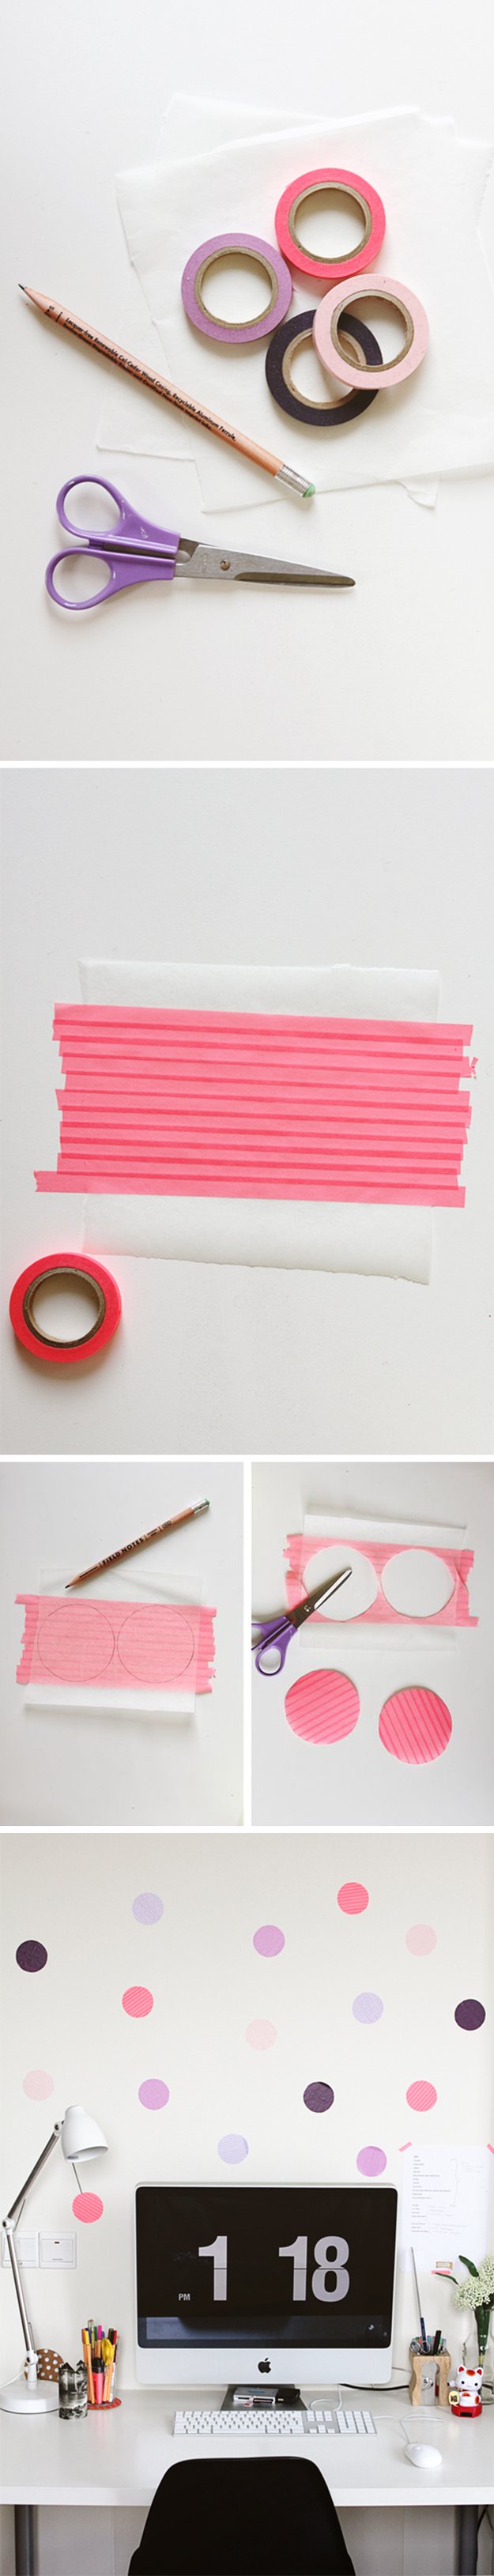 Washi Tape Crafts - DIY Dot Wall - Wall Art, Frames, Cards, Pencils, Room Decor and DIY Gifts, Back To School Supplies - Creative, Fun Craft Ideas for Teens, Tweens and Teenagers - Step by Step Tutorials and Instructions #washitape #crafts #cheapcrafts #teencrafts